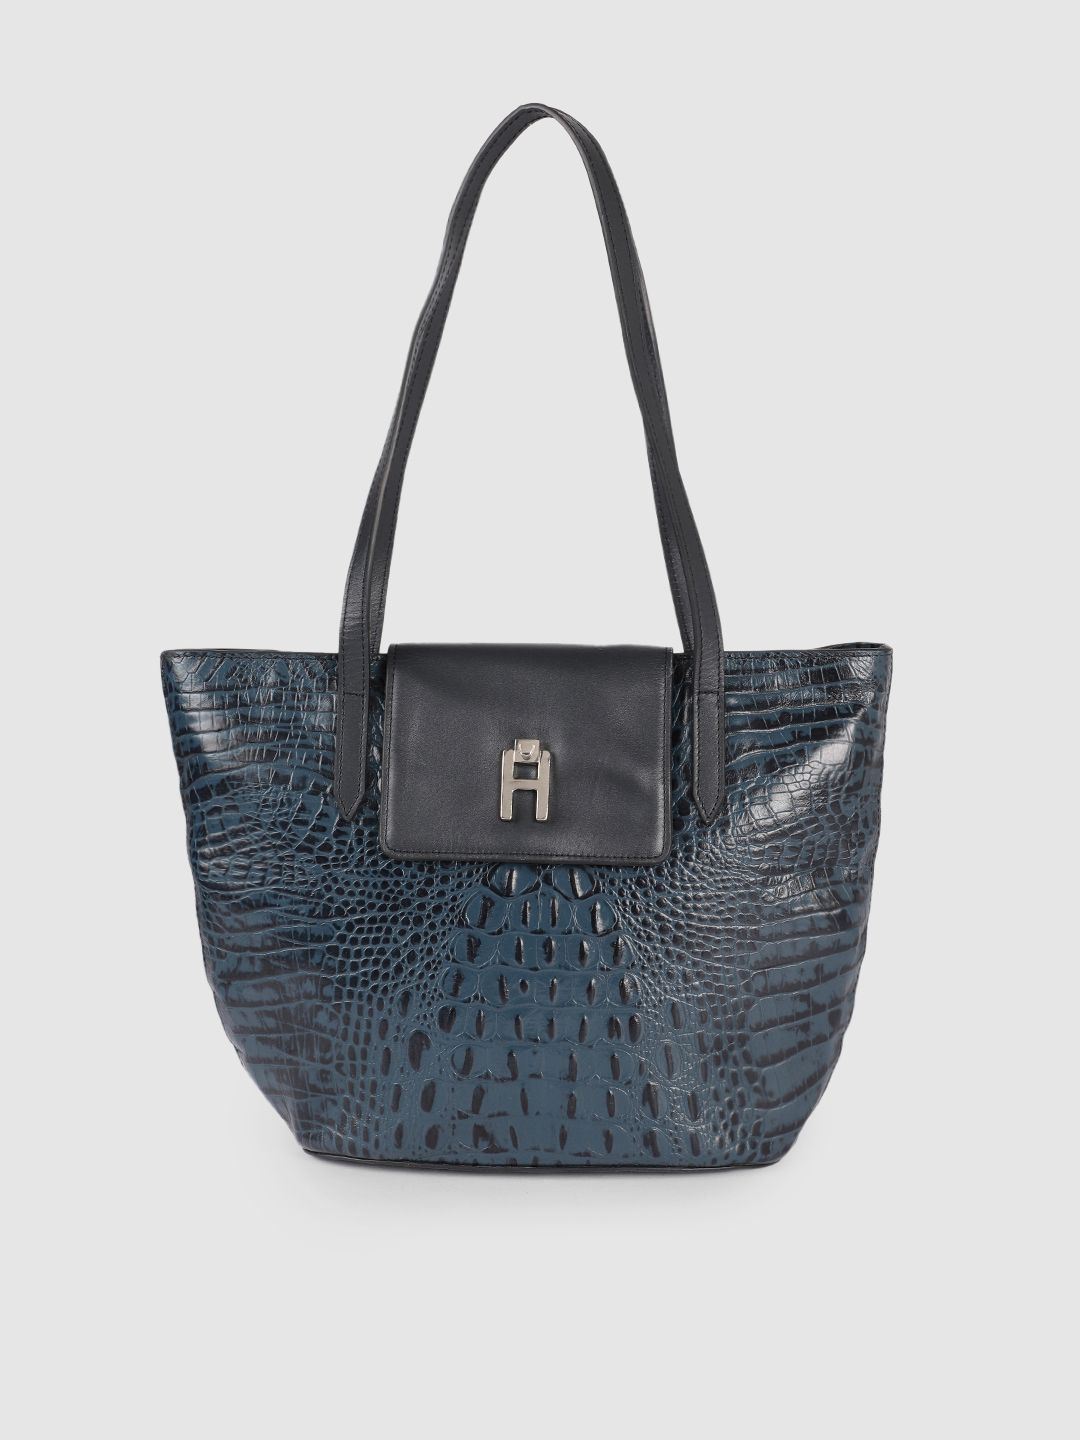 Hidesign Women Blue Animal Textured Leather Structured Shoulder Bag Price in India